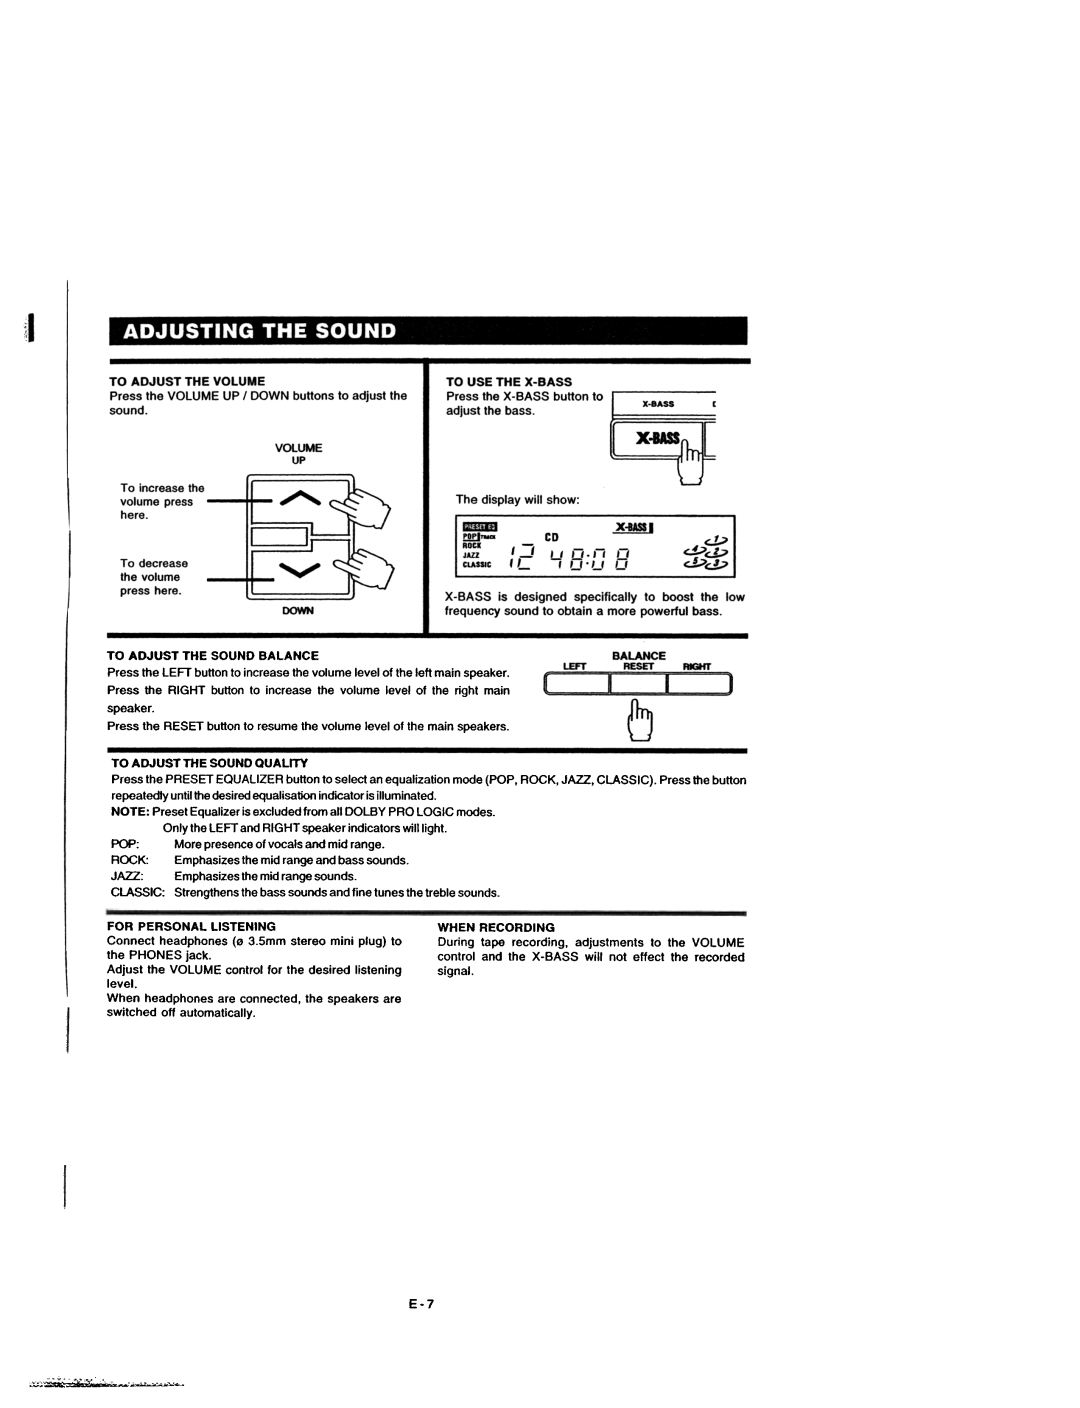 Dolby Laboratories CD Player manual ~~=... ~~ 